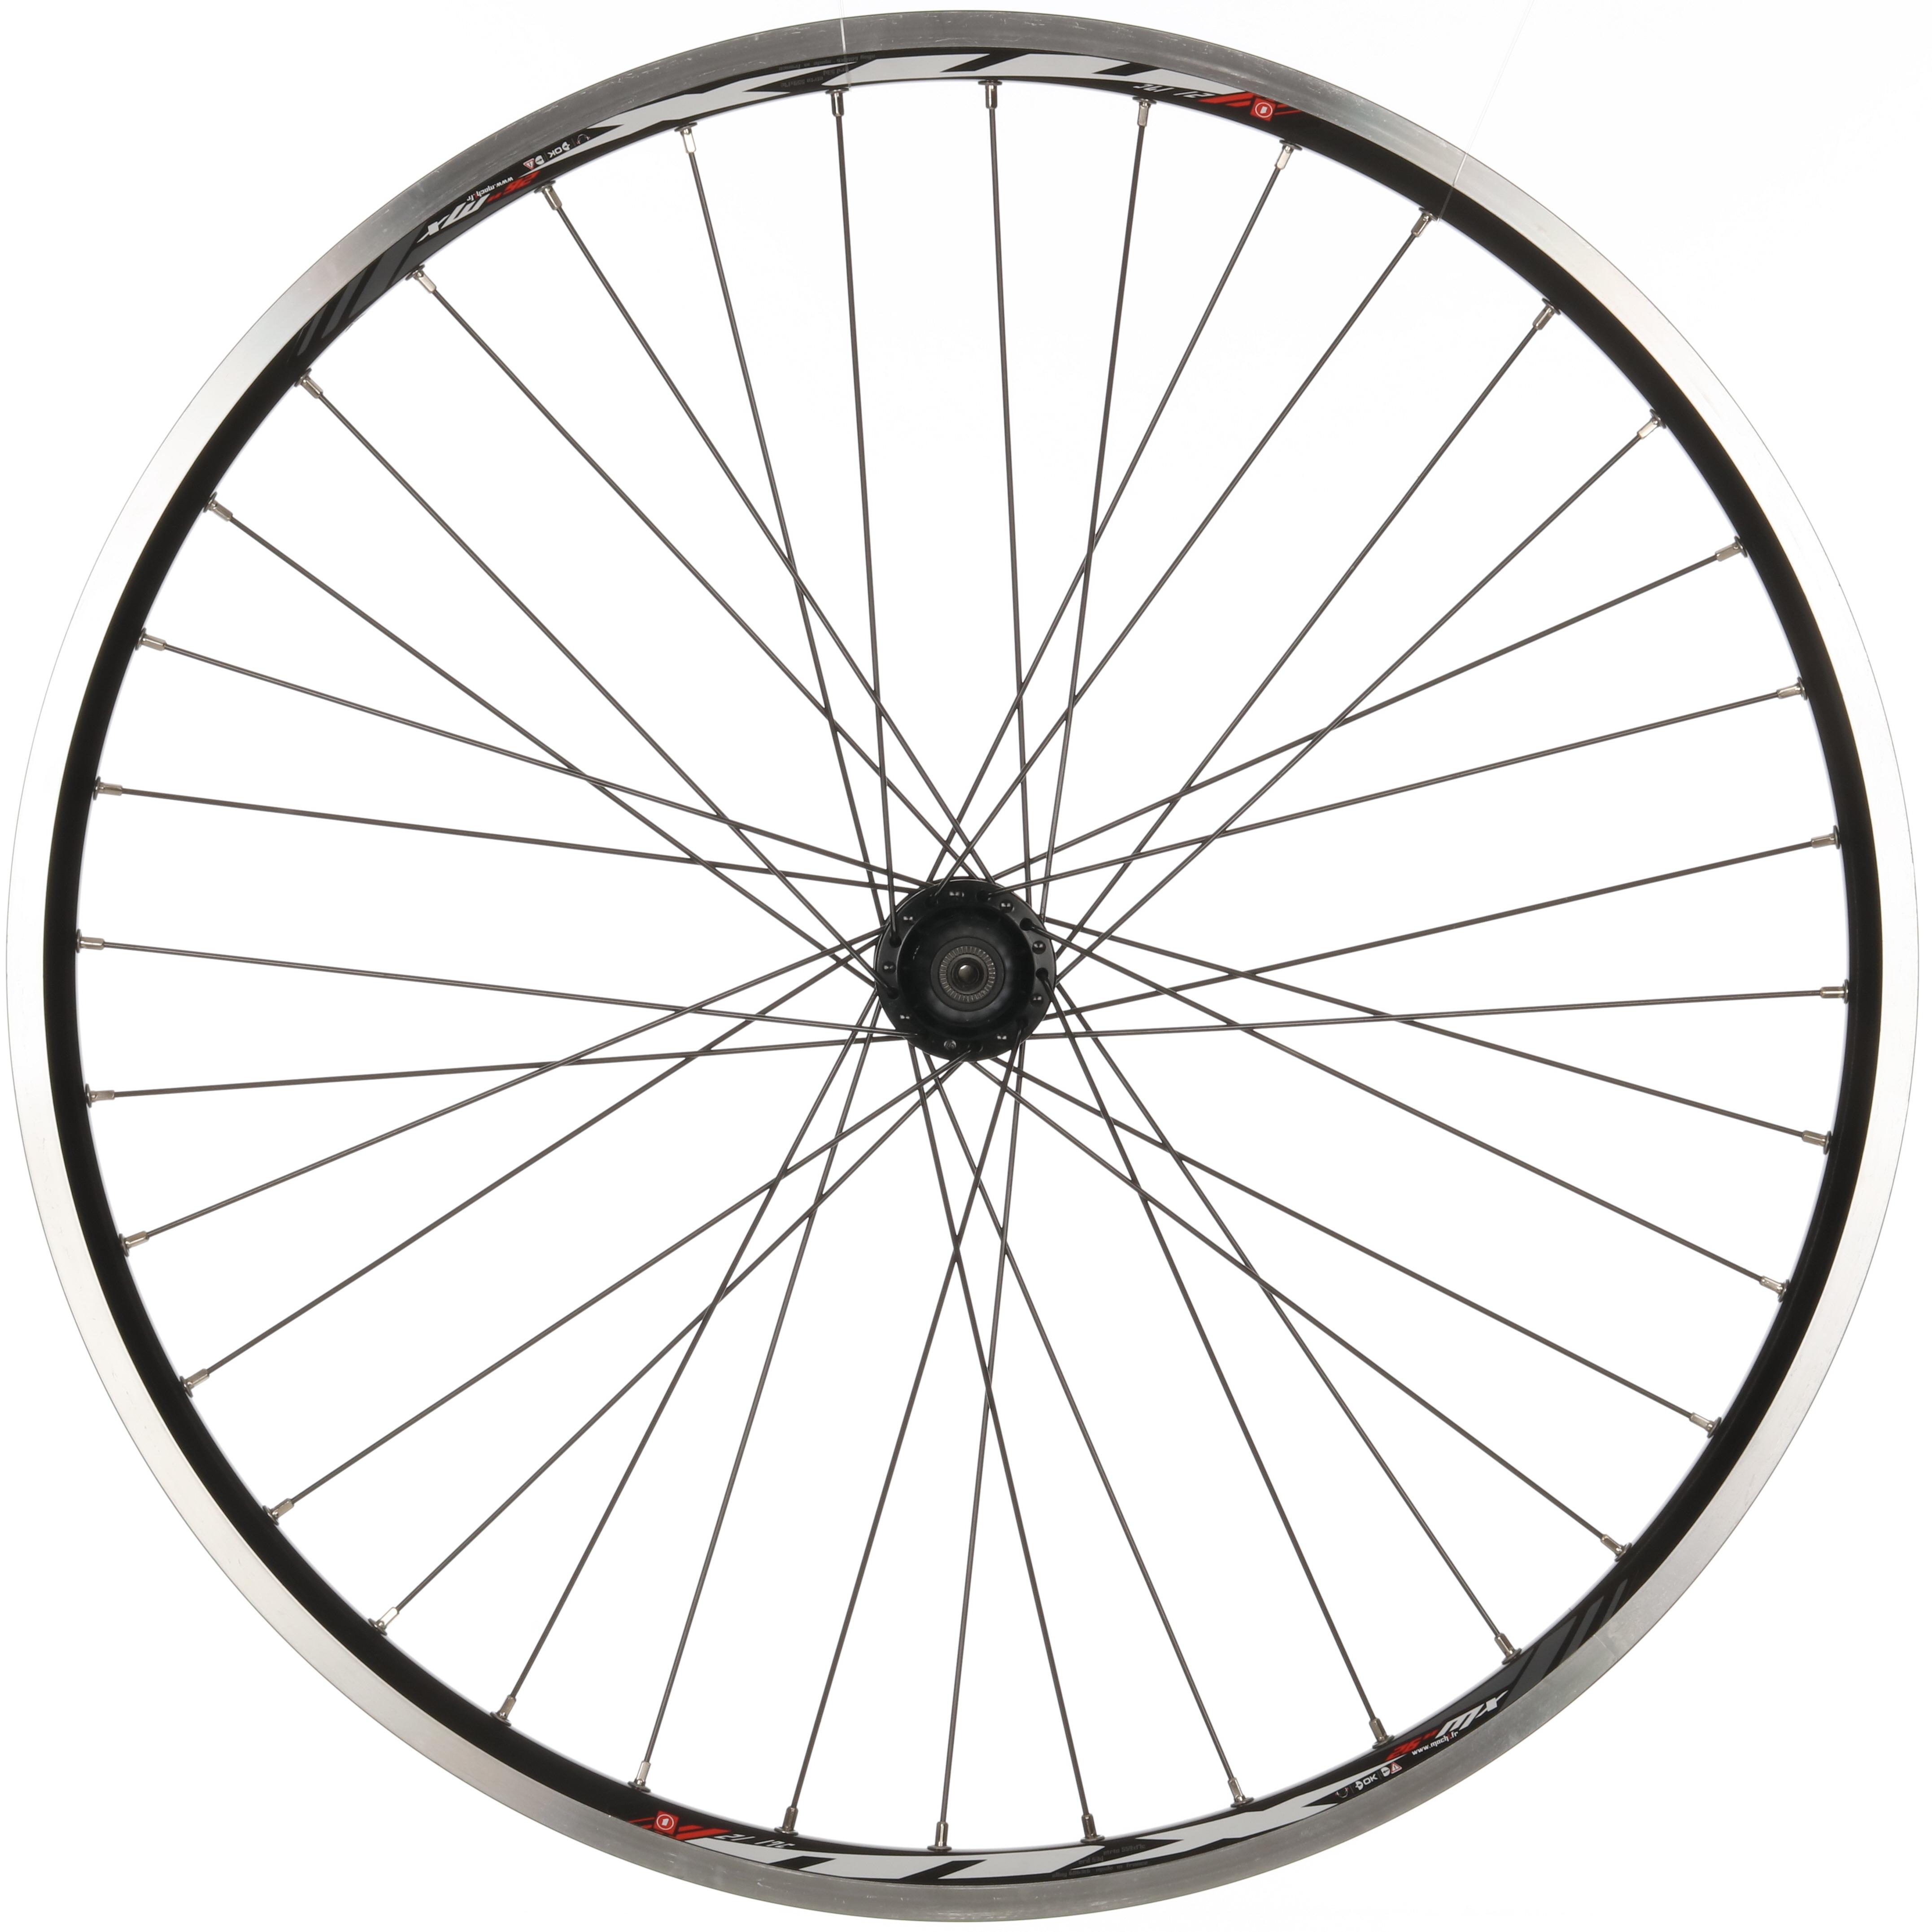 Raleigh 26 Inch Rear Wheel, 8/9 Speed, Quick Release Axle